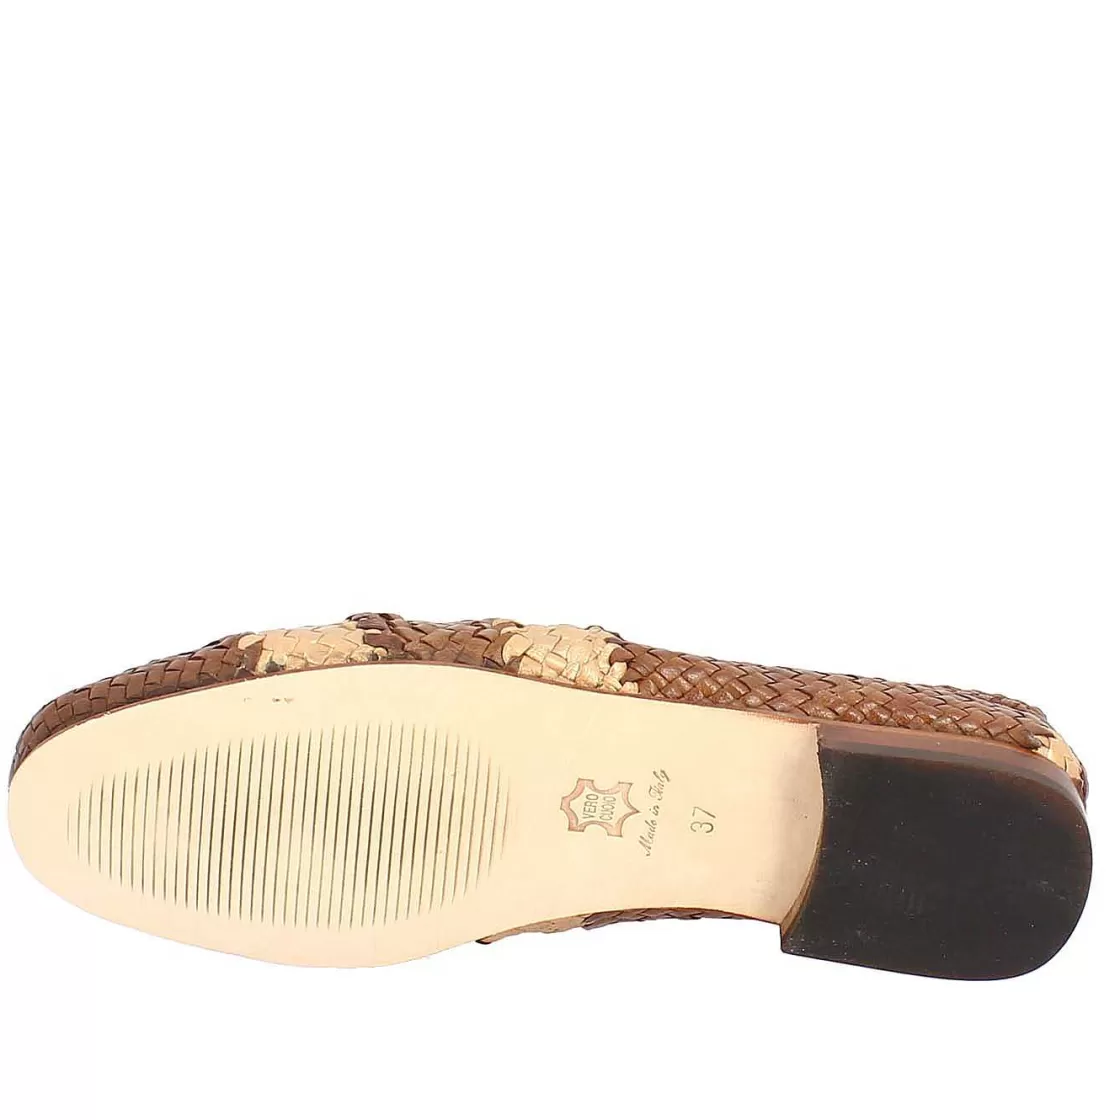 Leonardo Handmade Women'S Loafers In Brown And Beige Woven Leather Fashion